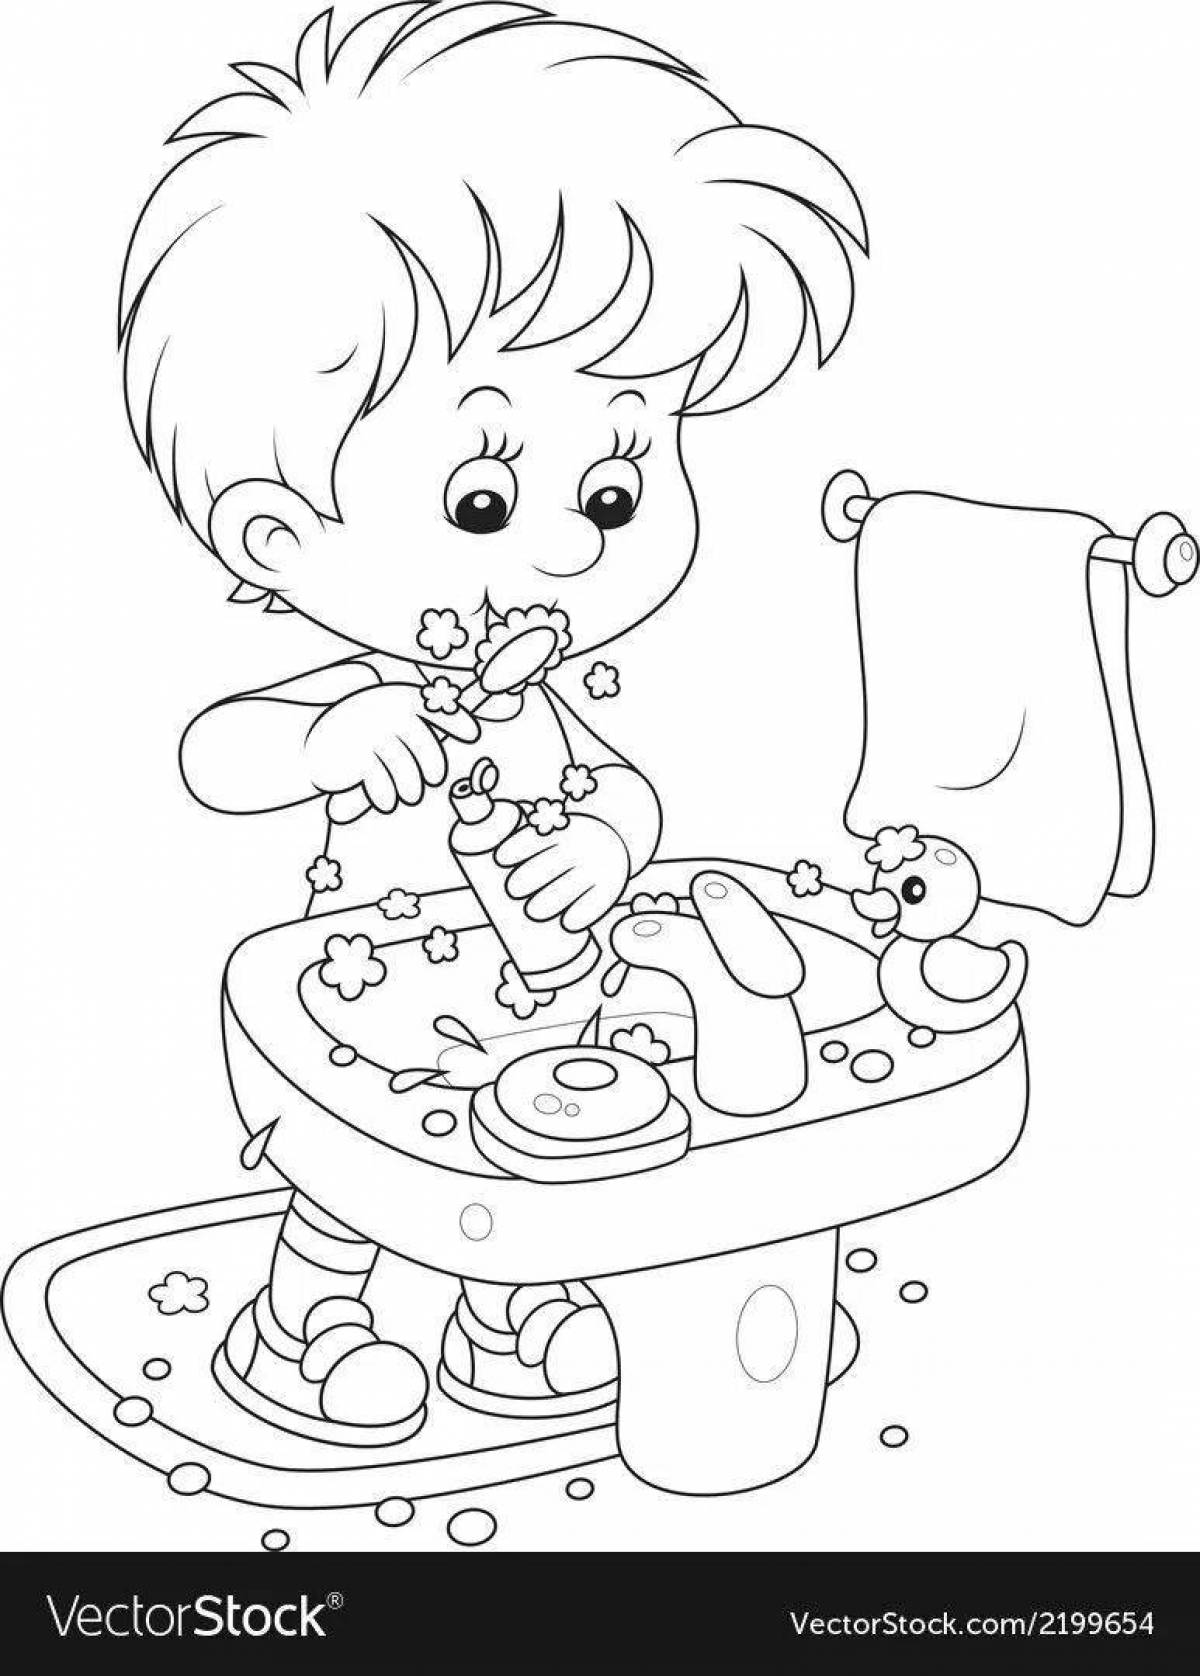 Colorful hygiene coloring page for tyros